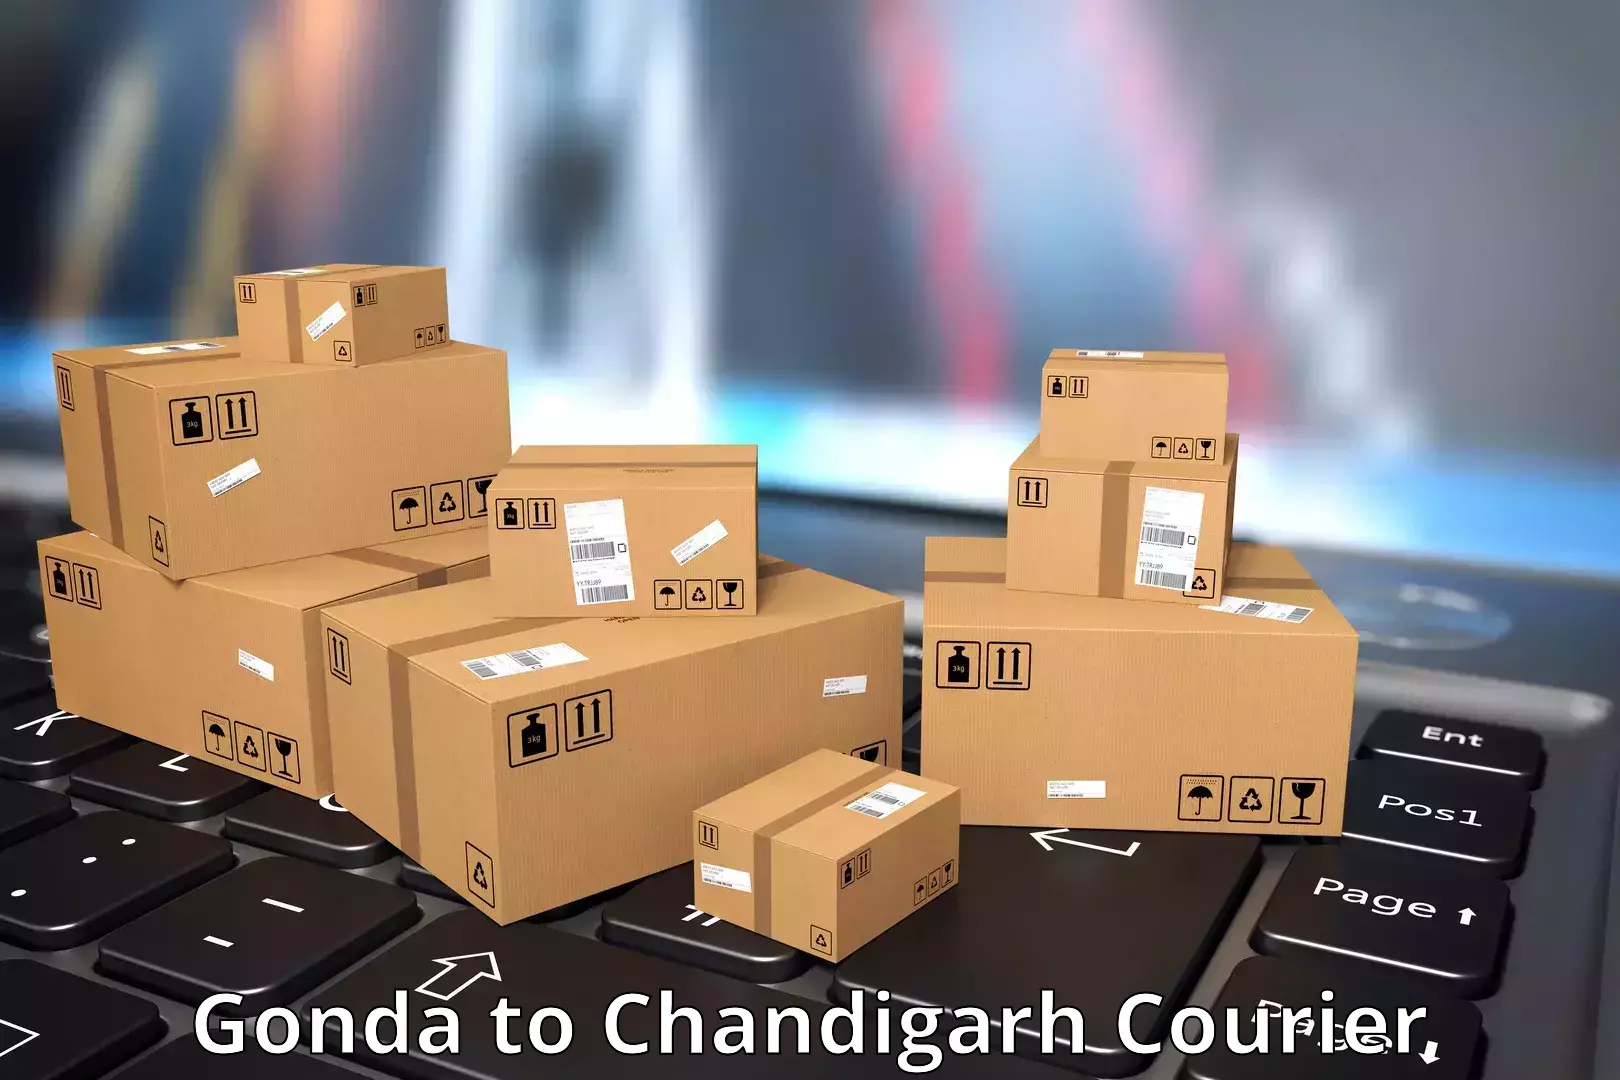 Fast delivery service Gonda to Chandigarh